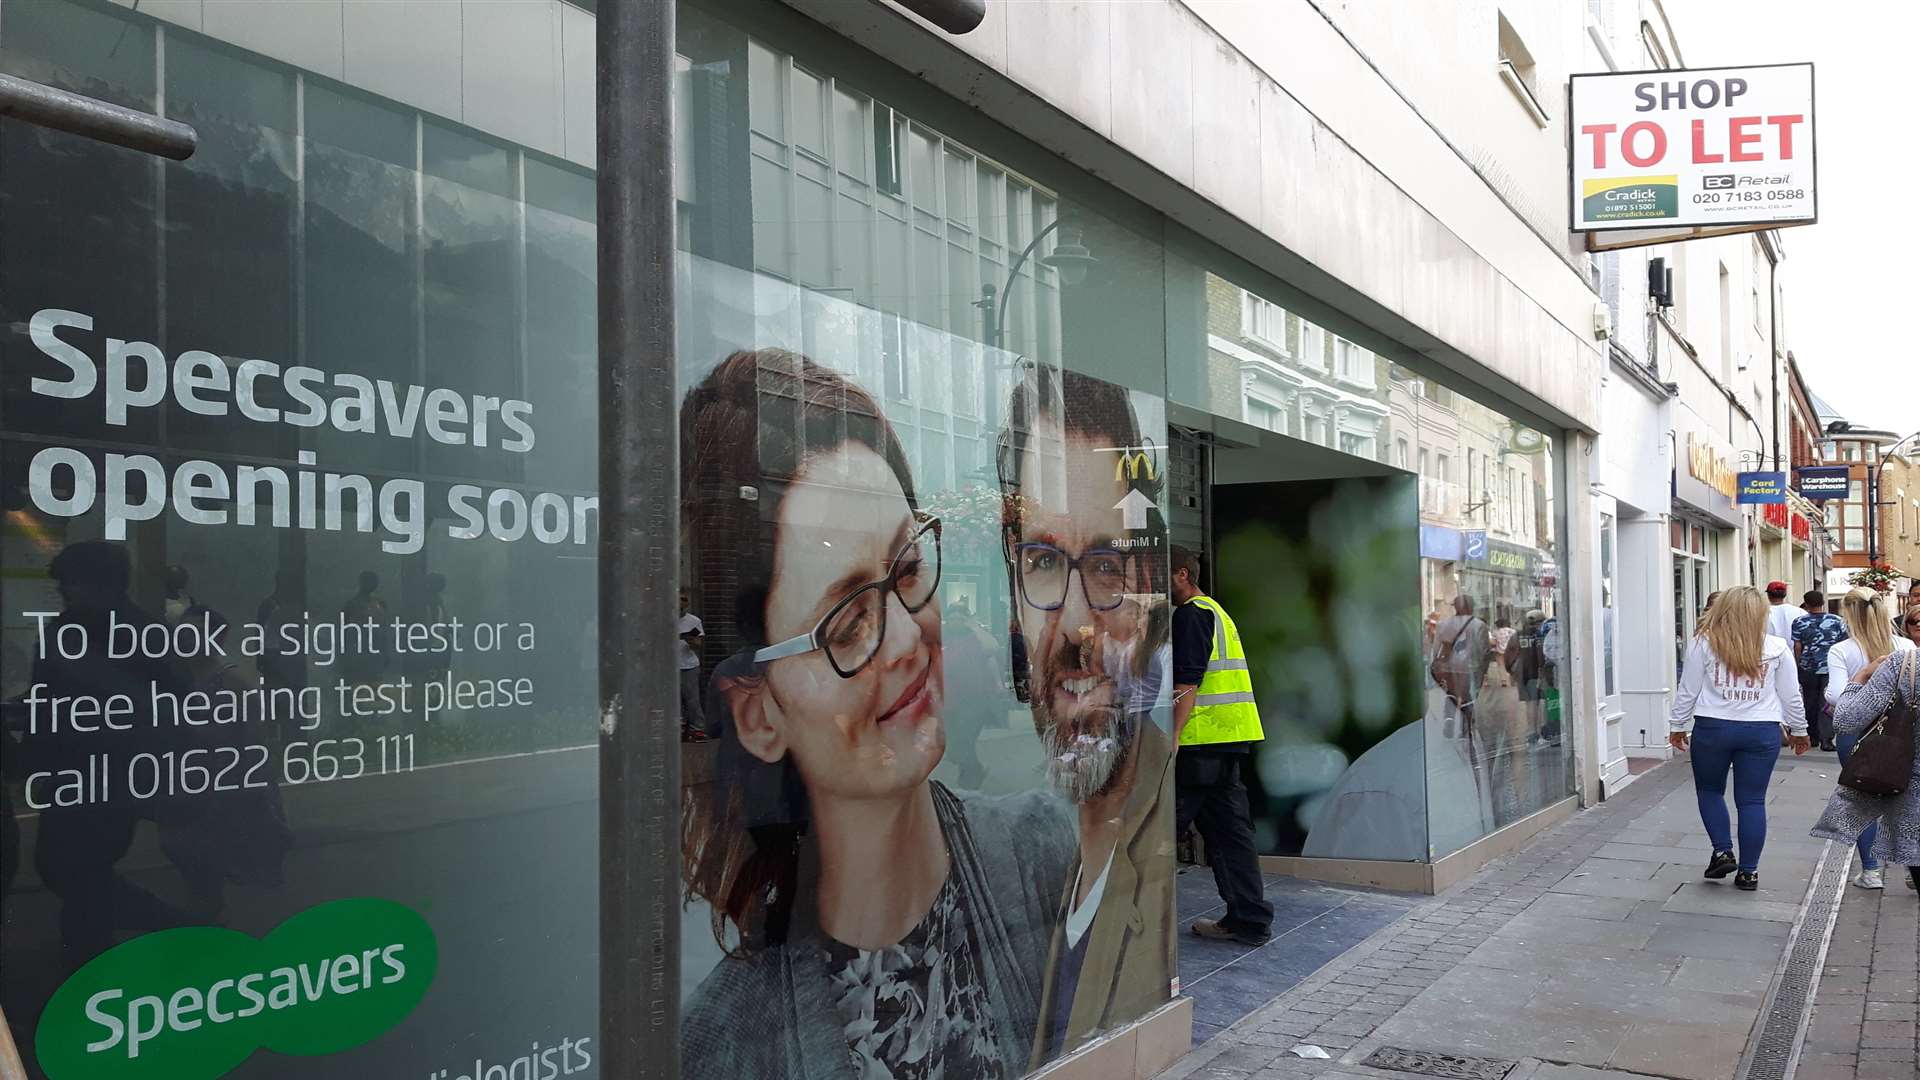 Specsavers is moving into Maidstone's Week Street